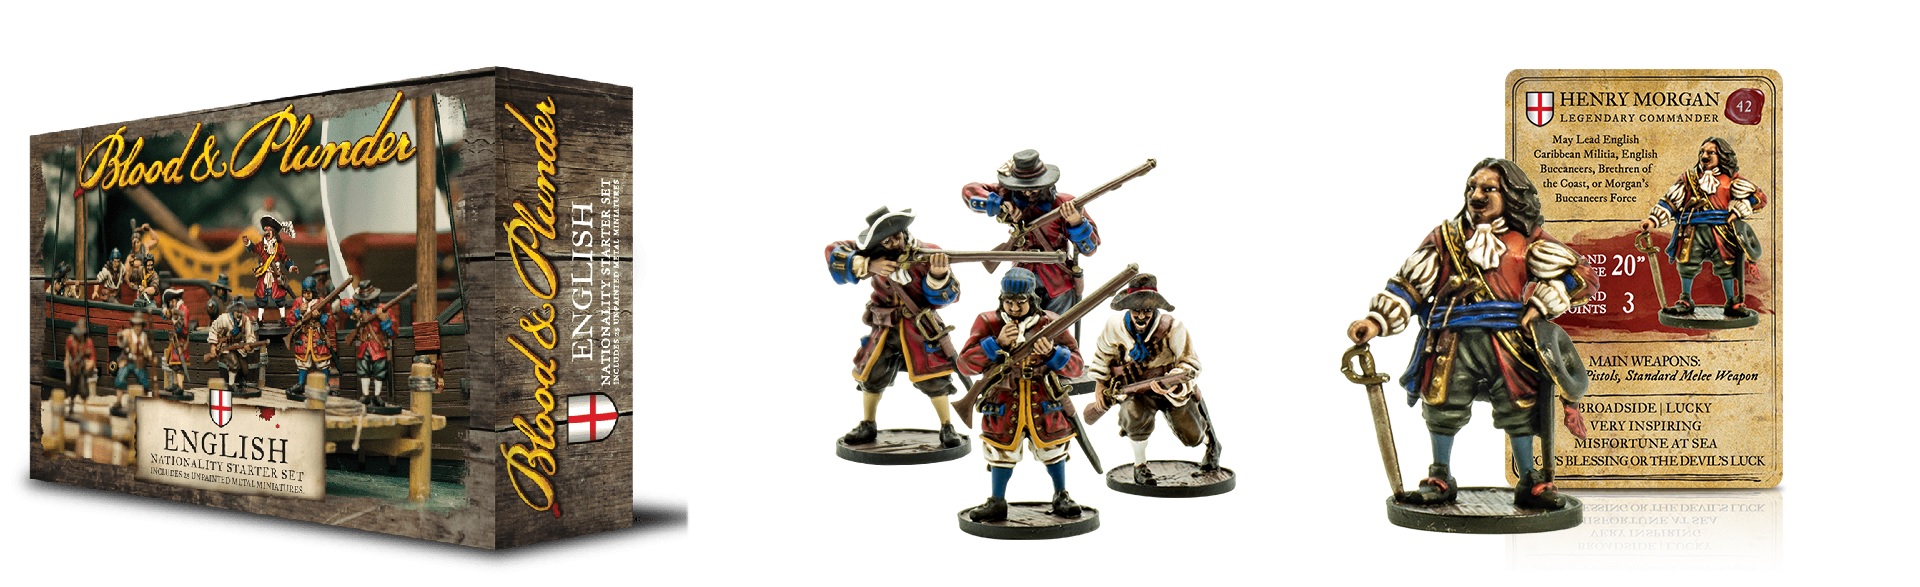 Blood and Plunder Miniatures.